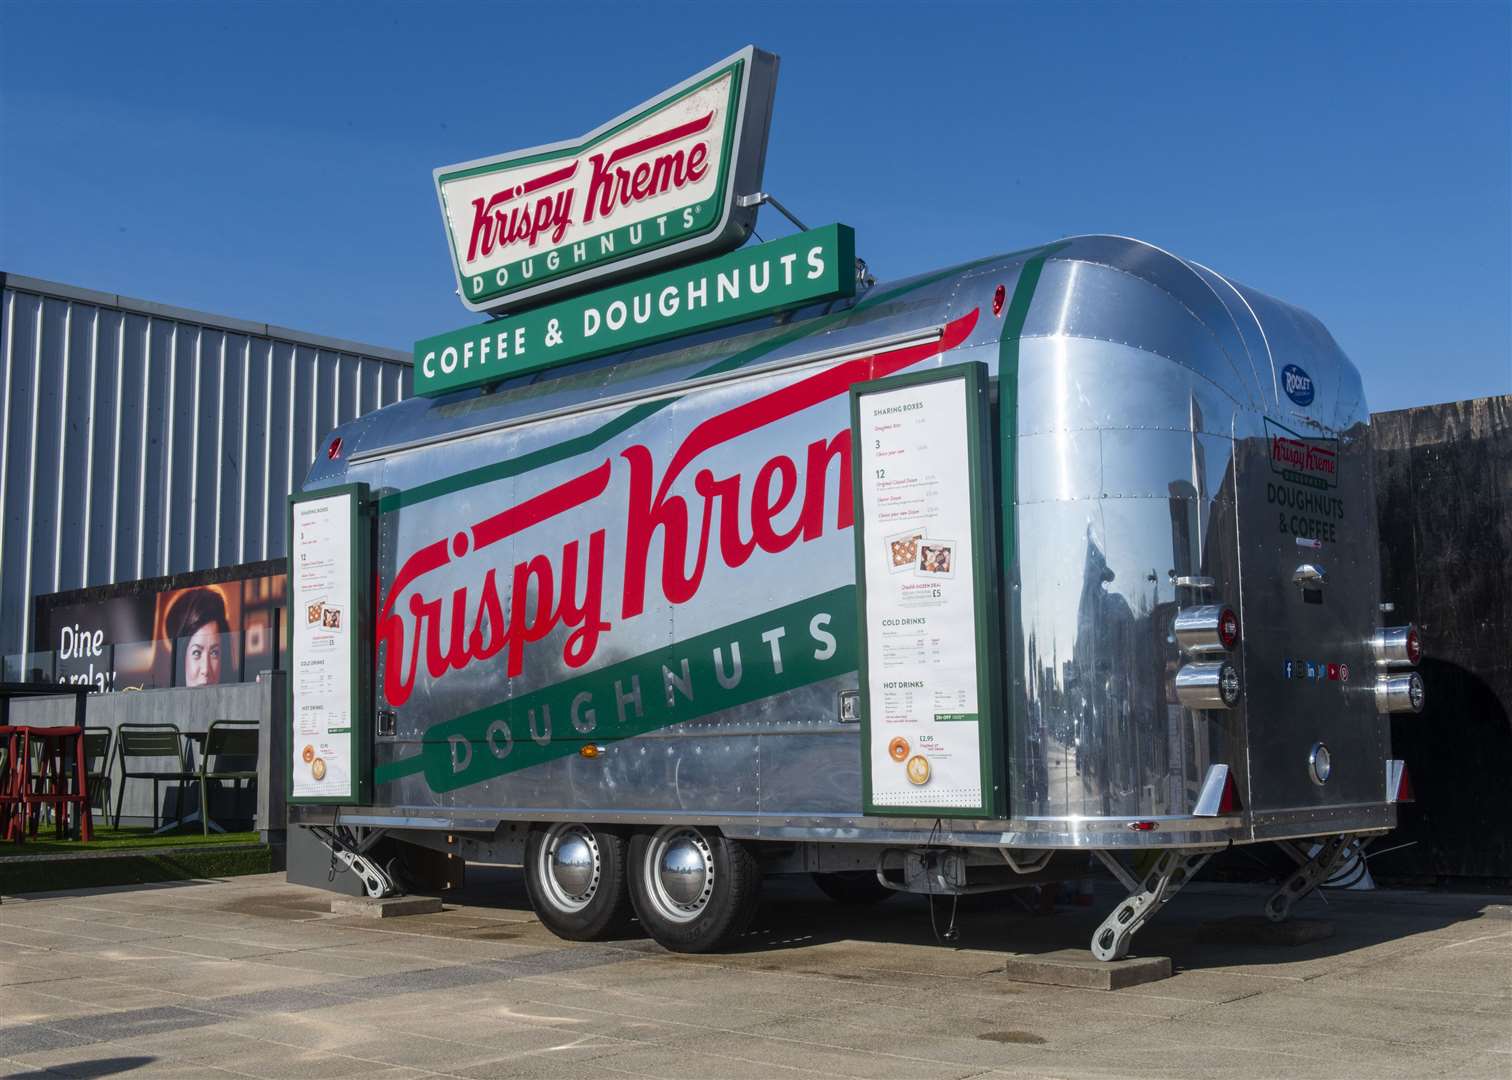 The new airstream store is coming to the Designer Outlet